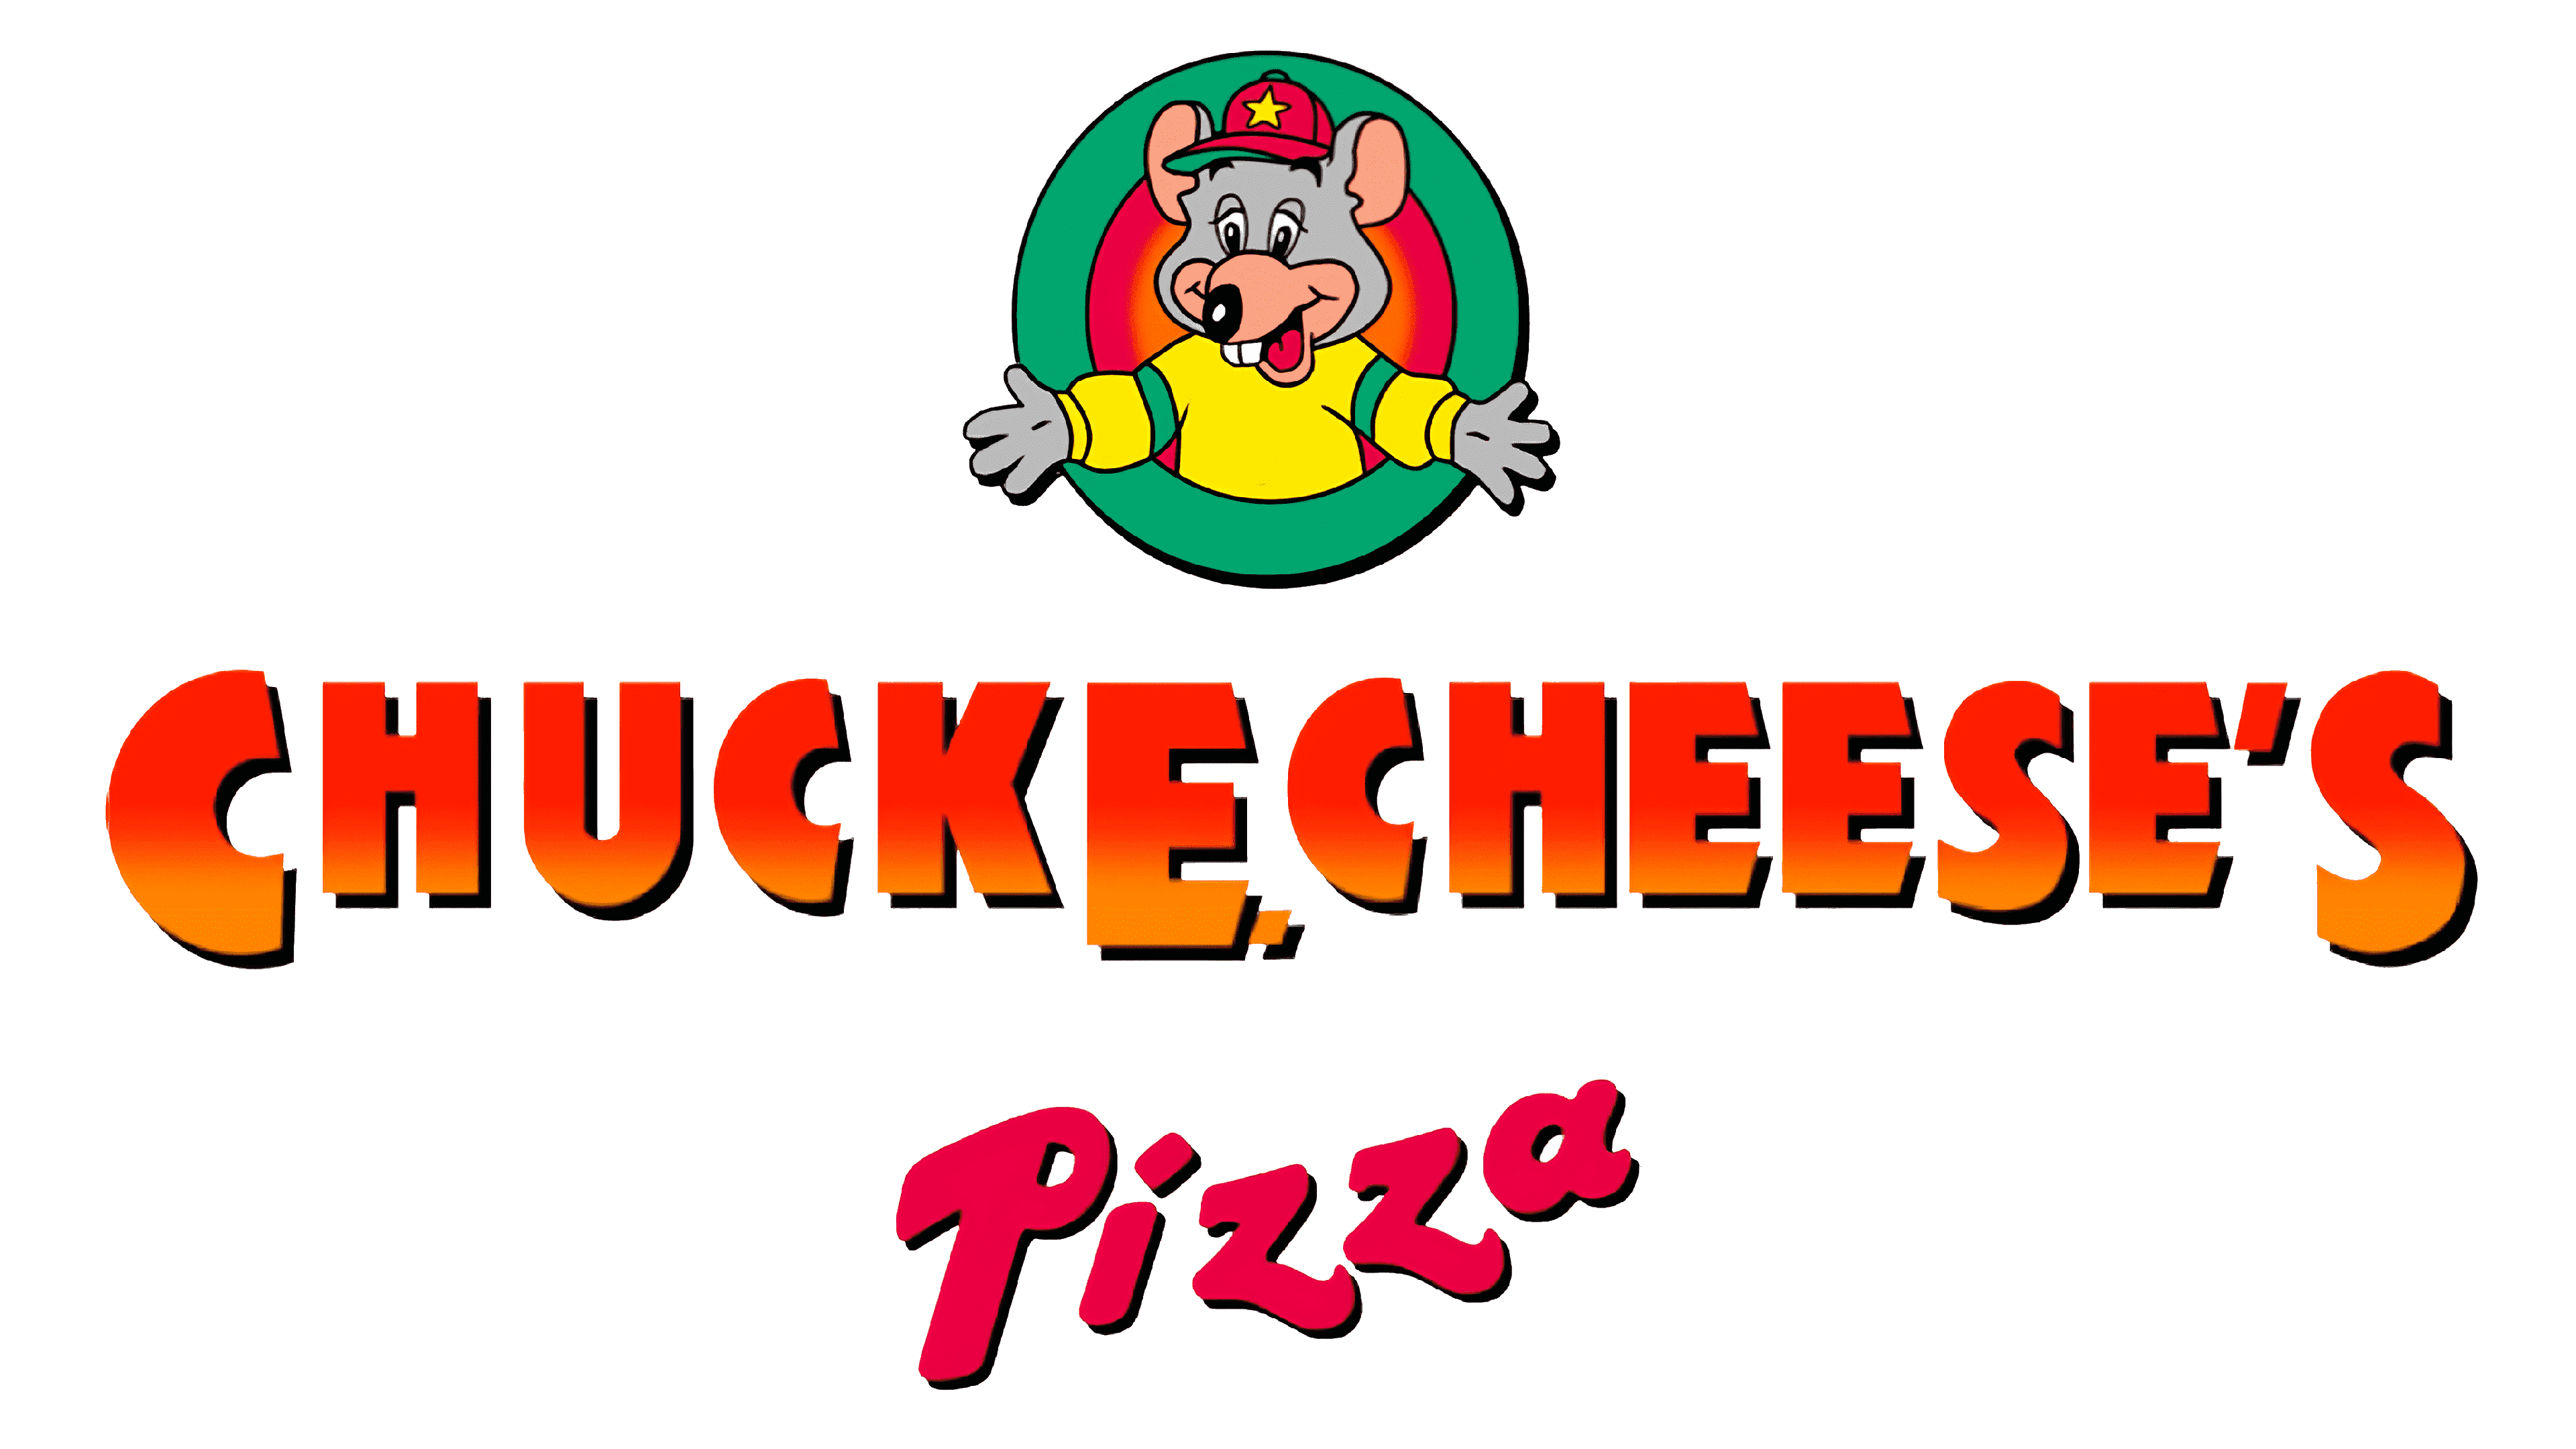 From Mouse To Star The Chuck E Cheese Logo History